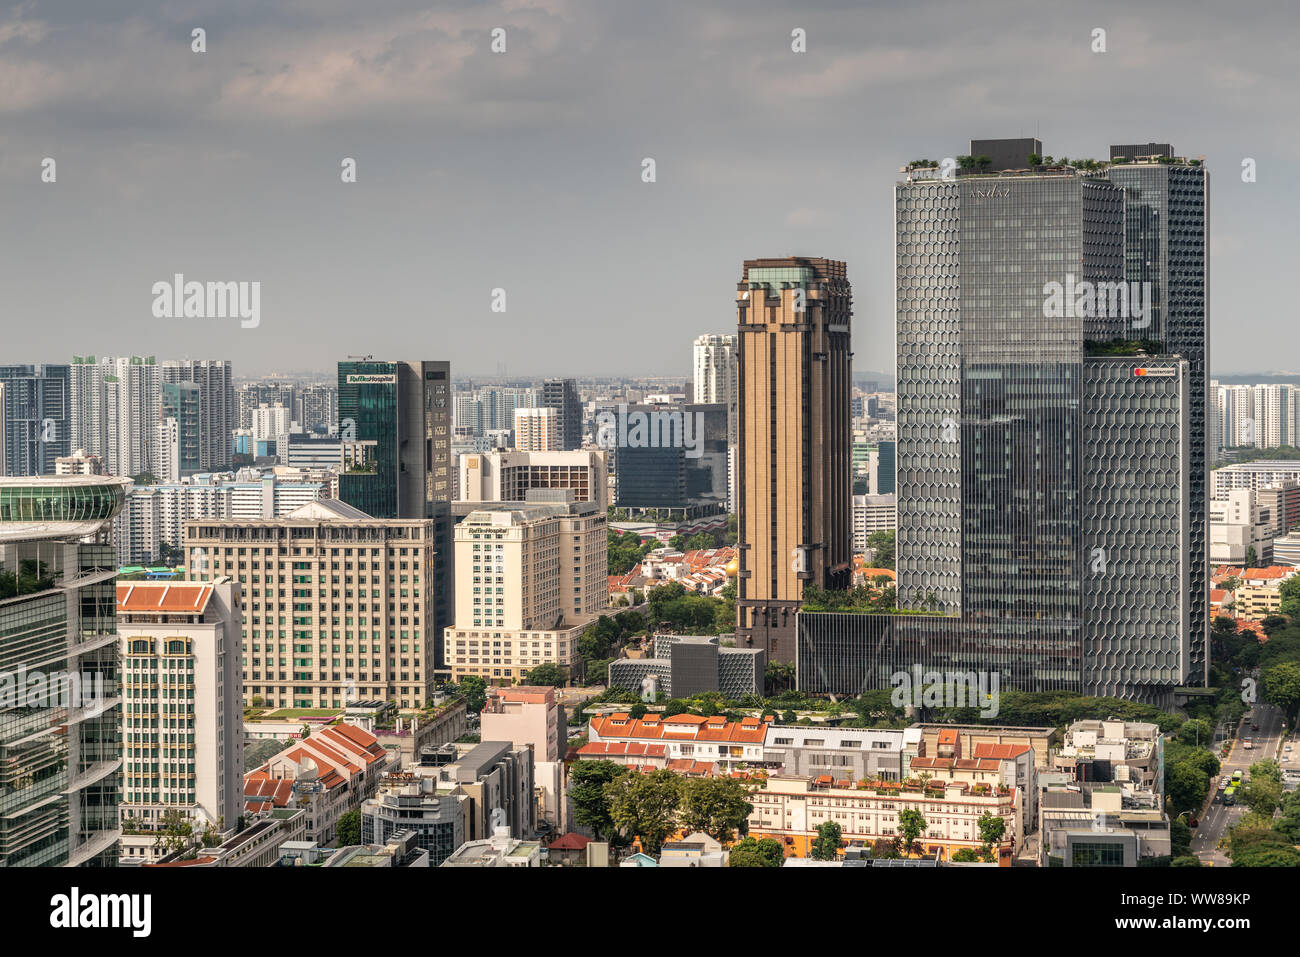 Singapore - March 20, 2019: Shot over hundreds of skyscrapers under heavy cloudy sky. Centered on Raffles Hospital and Andaz tower by Hyatt. Smaller b Stock Photo